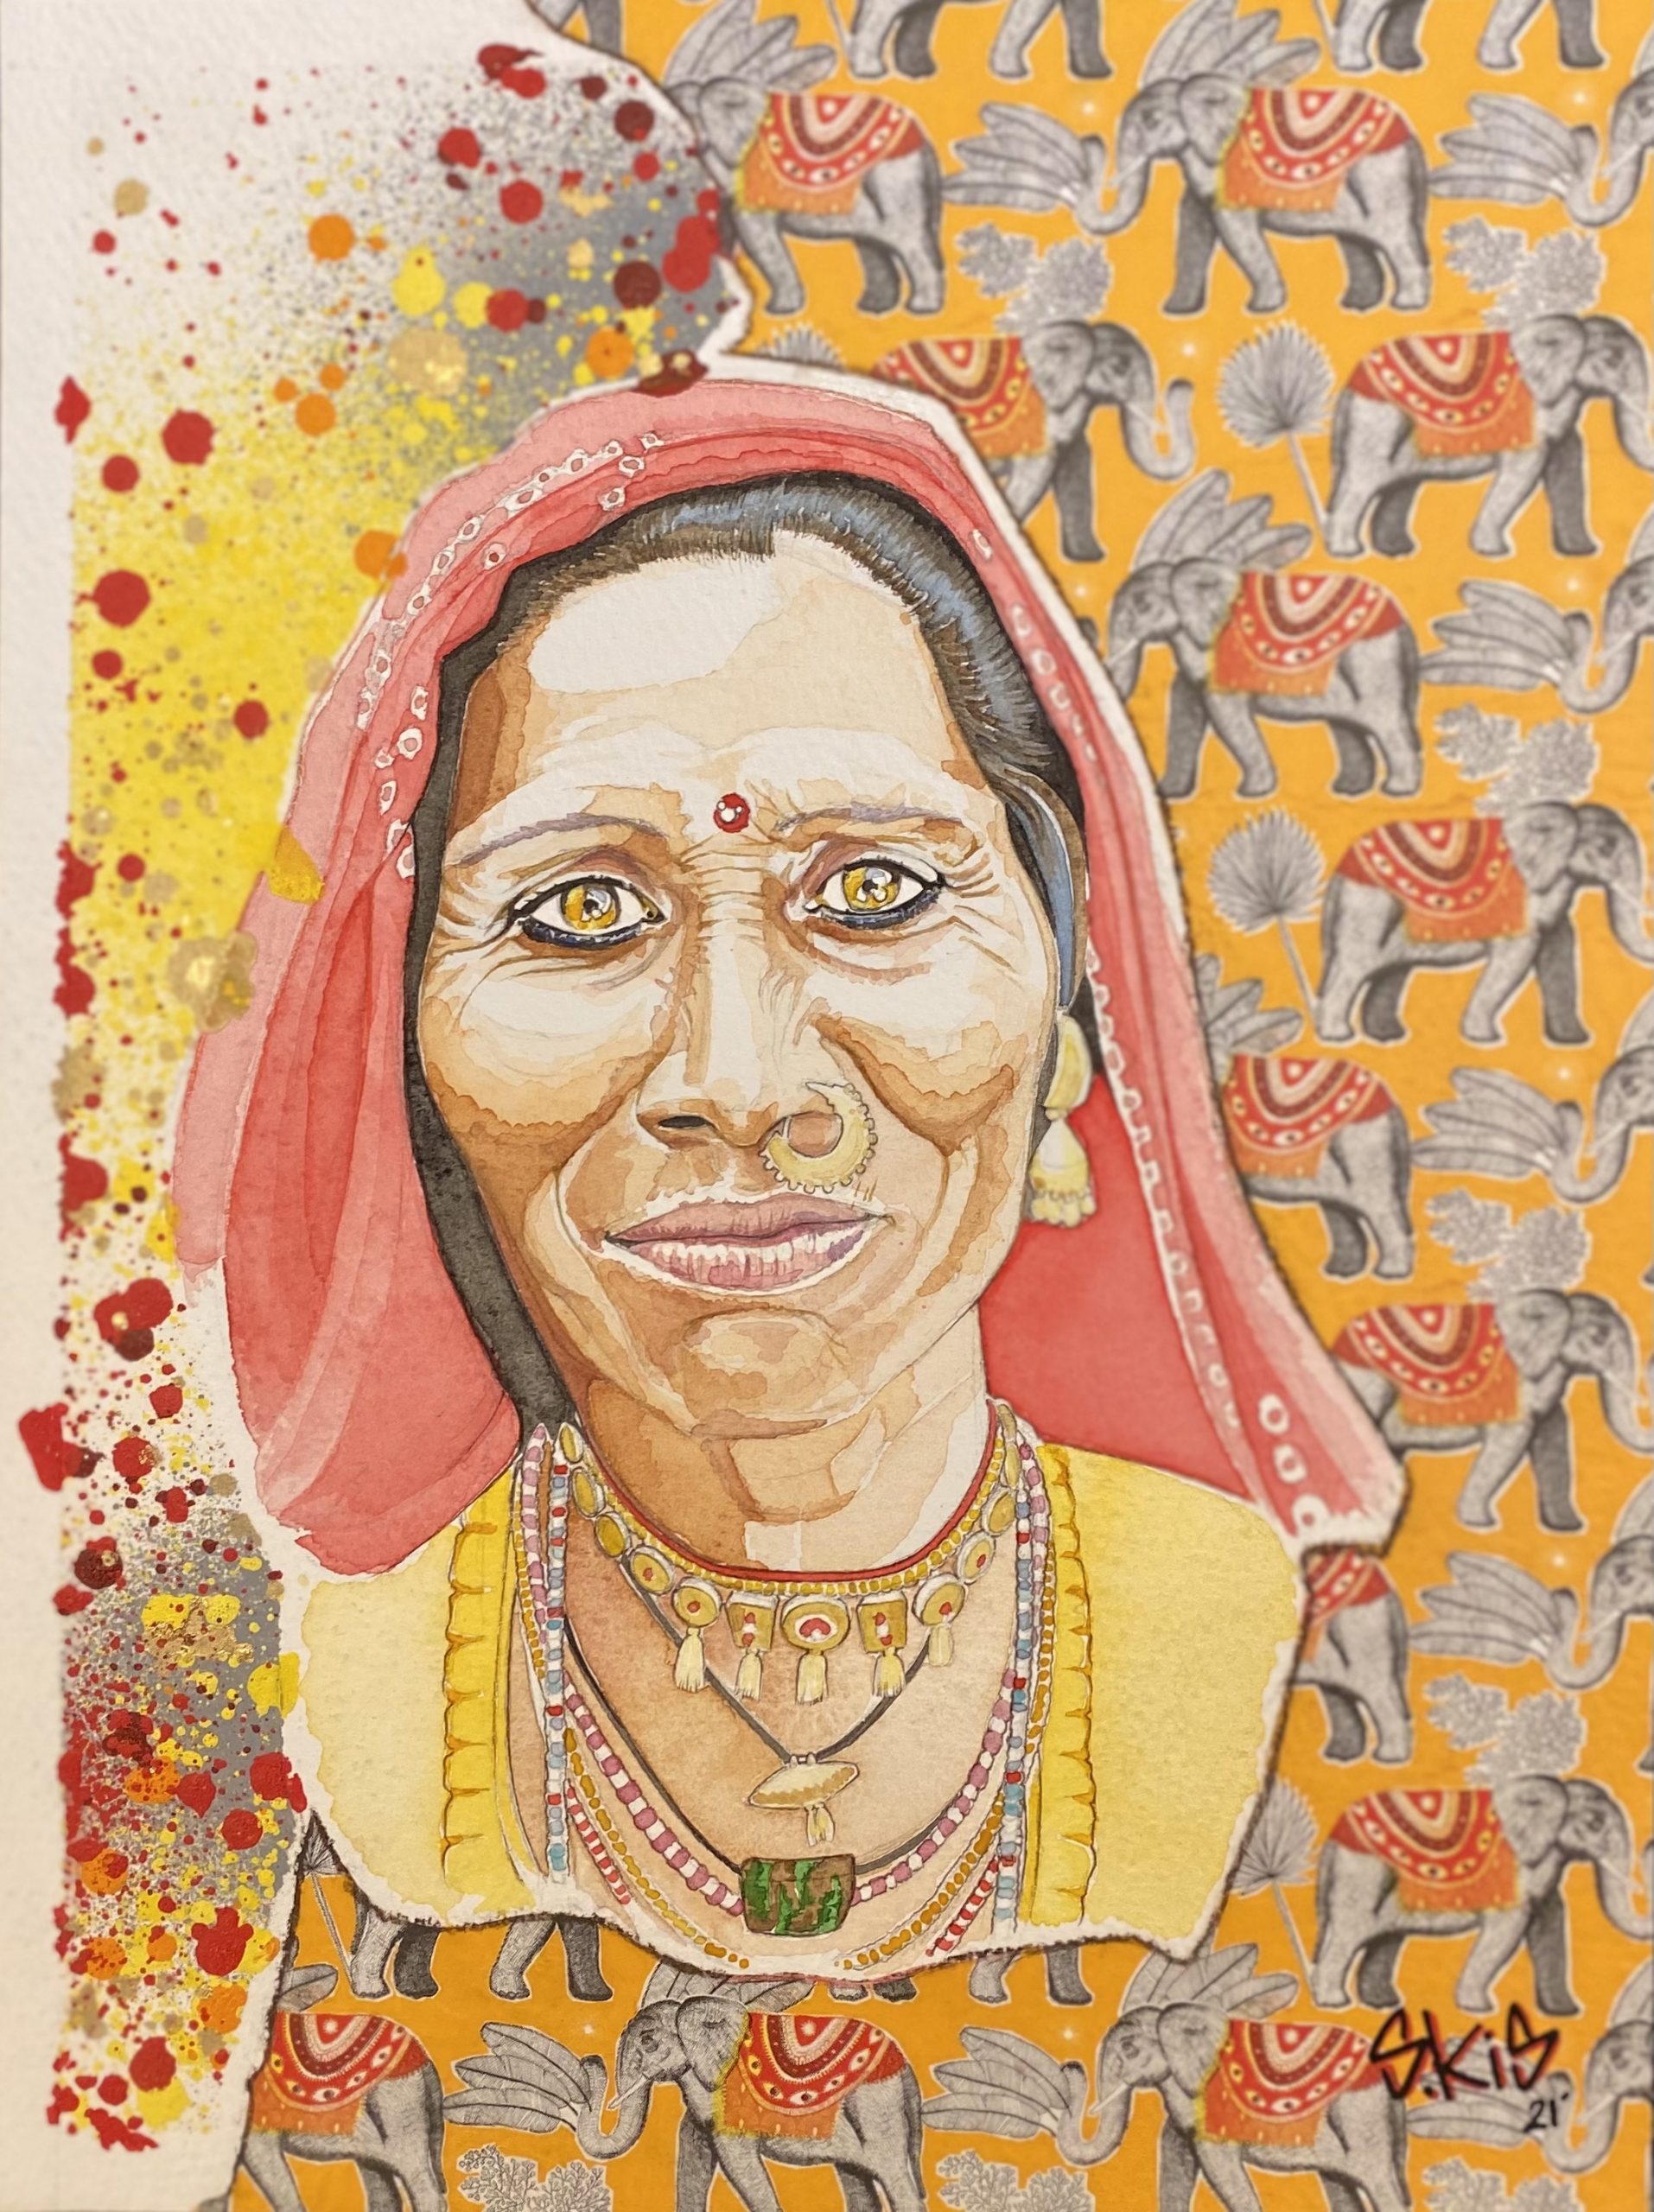 S-KIS, Rajasthani woman, 31x23,5 cm, Watercolour and Spraypaint on paper, 2021